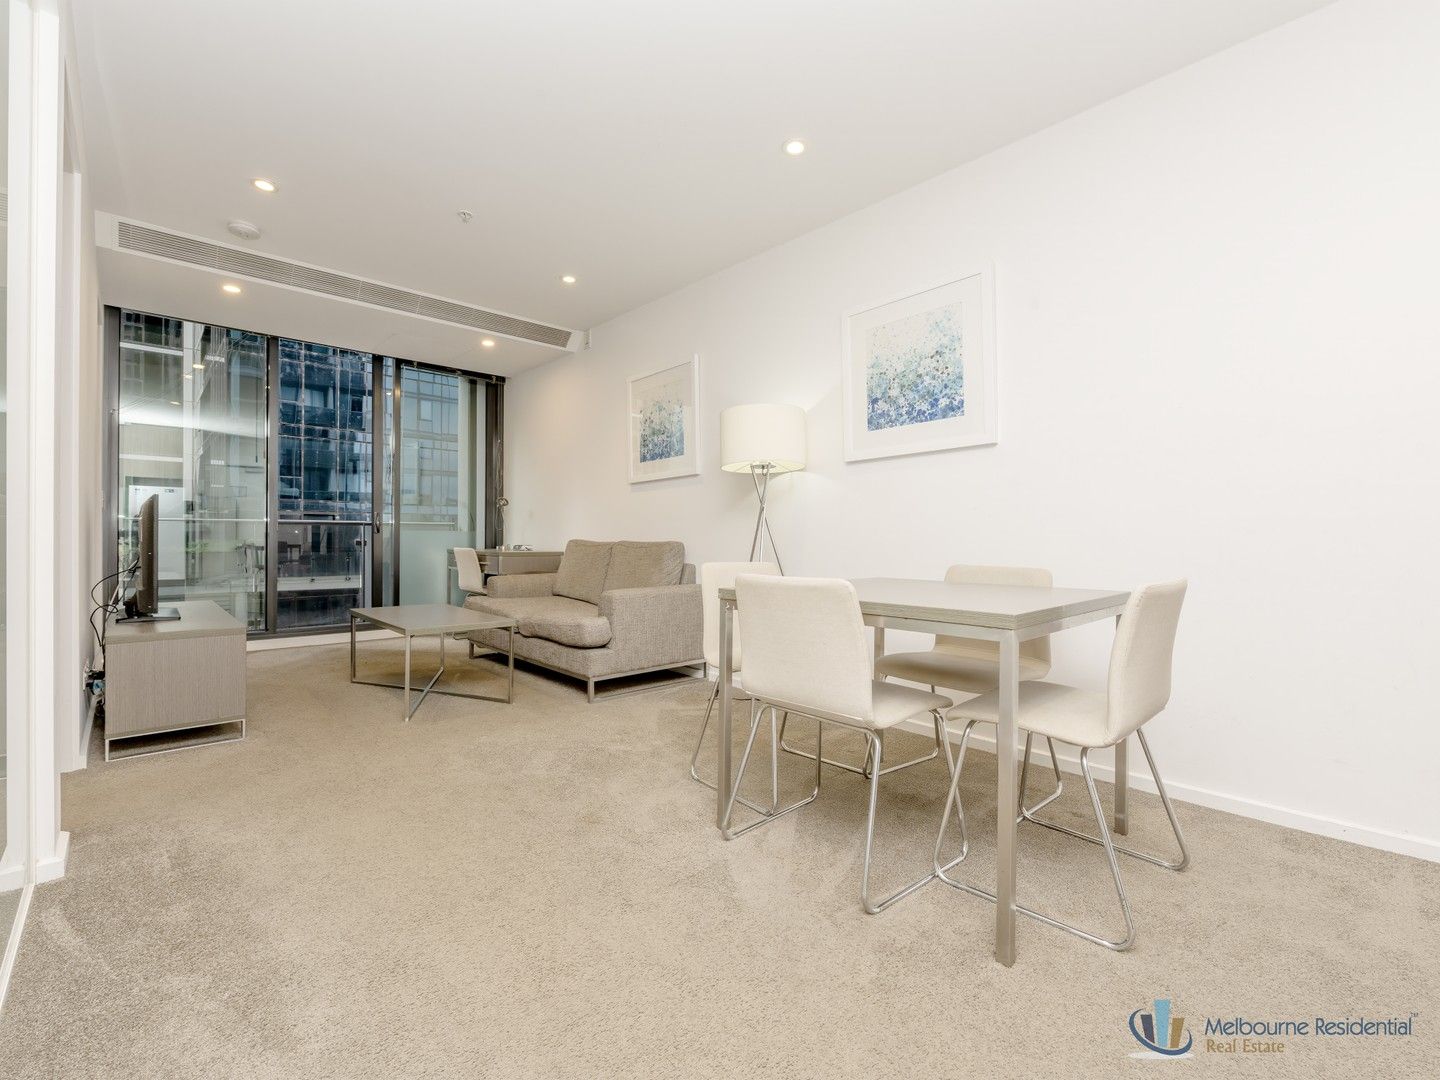 2 bedrooms Apartment / Unit / Flat in 1111/151 City Road SOUTHBANK VIC, 3006